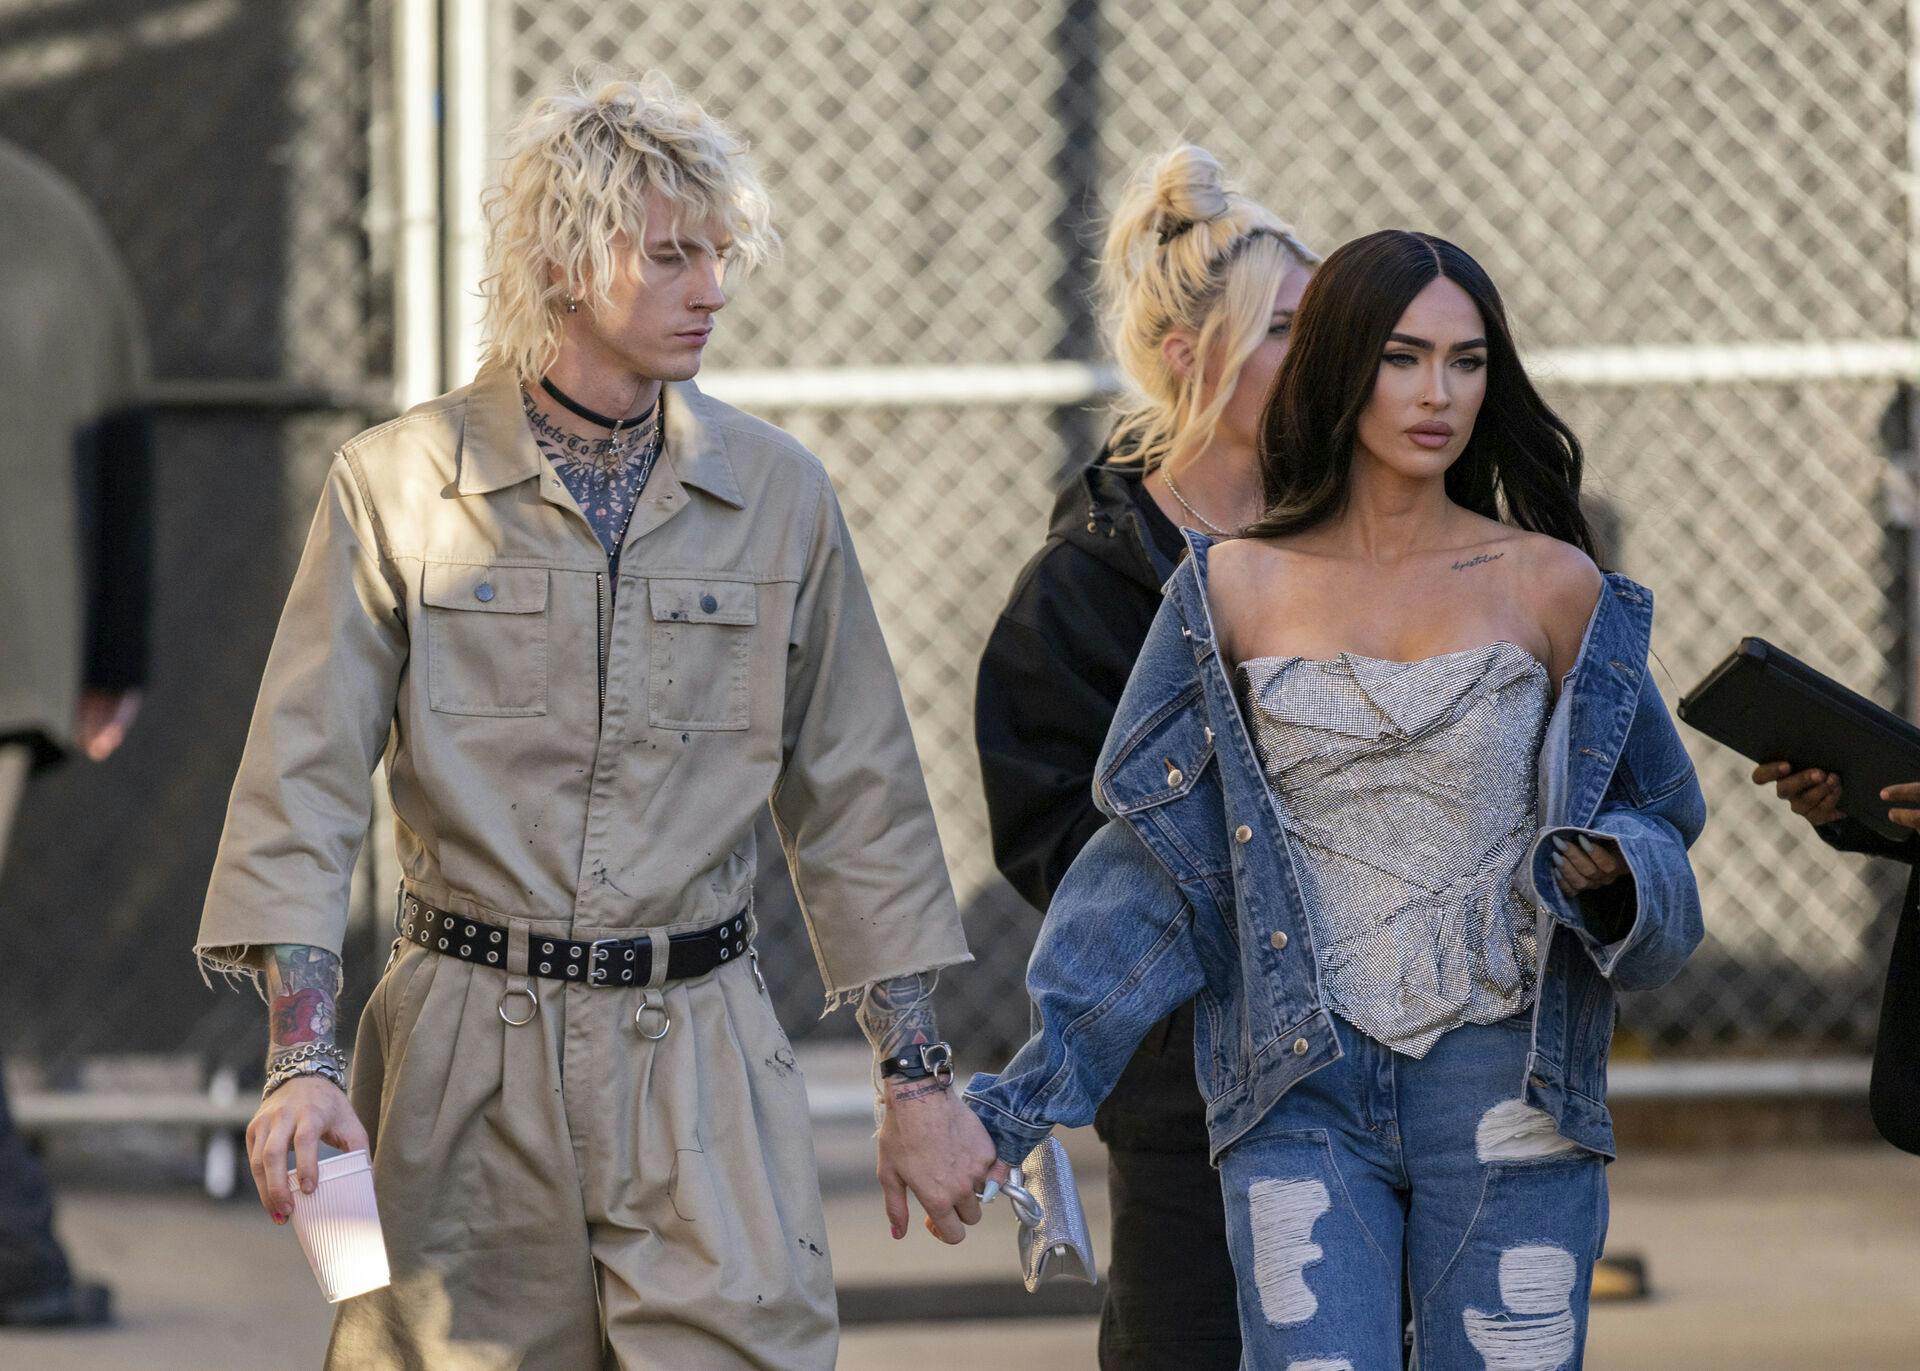 Machine Gun Kelly and Megan Fox seen at "Jimmy Kimmel Live" in Los Angeles, California. December 07, 2022. Credit: BauerGriffin/MediaPunch /IPX